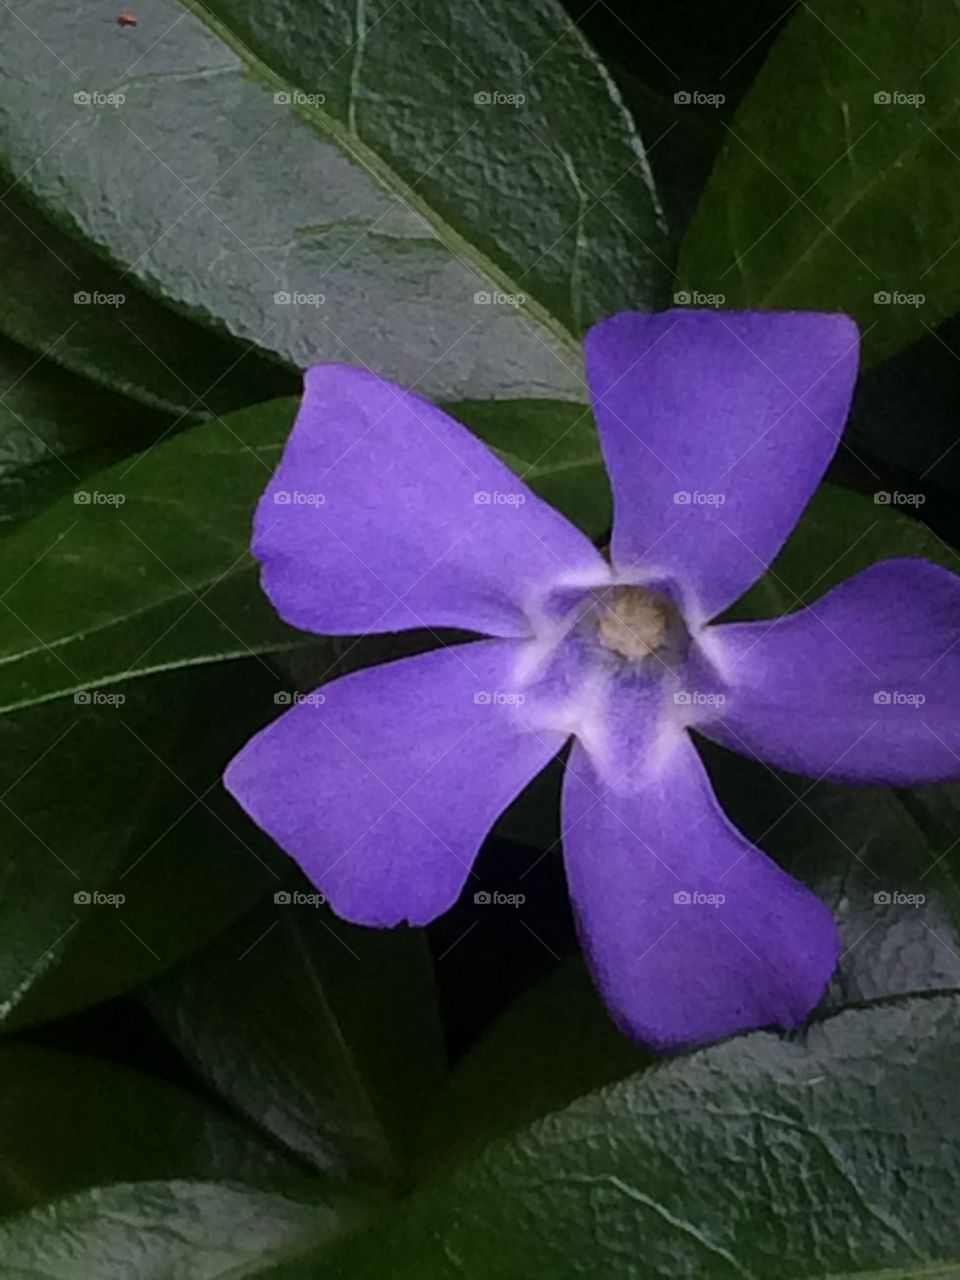 Periwinkle blossom